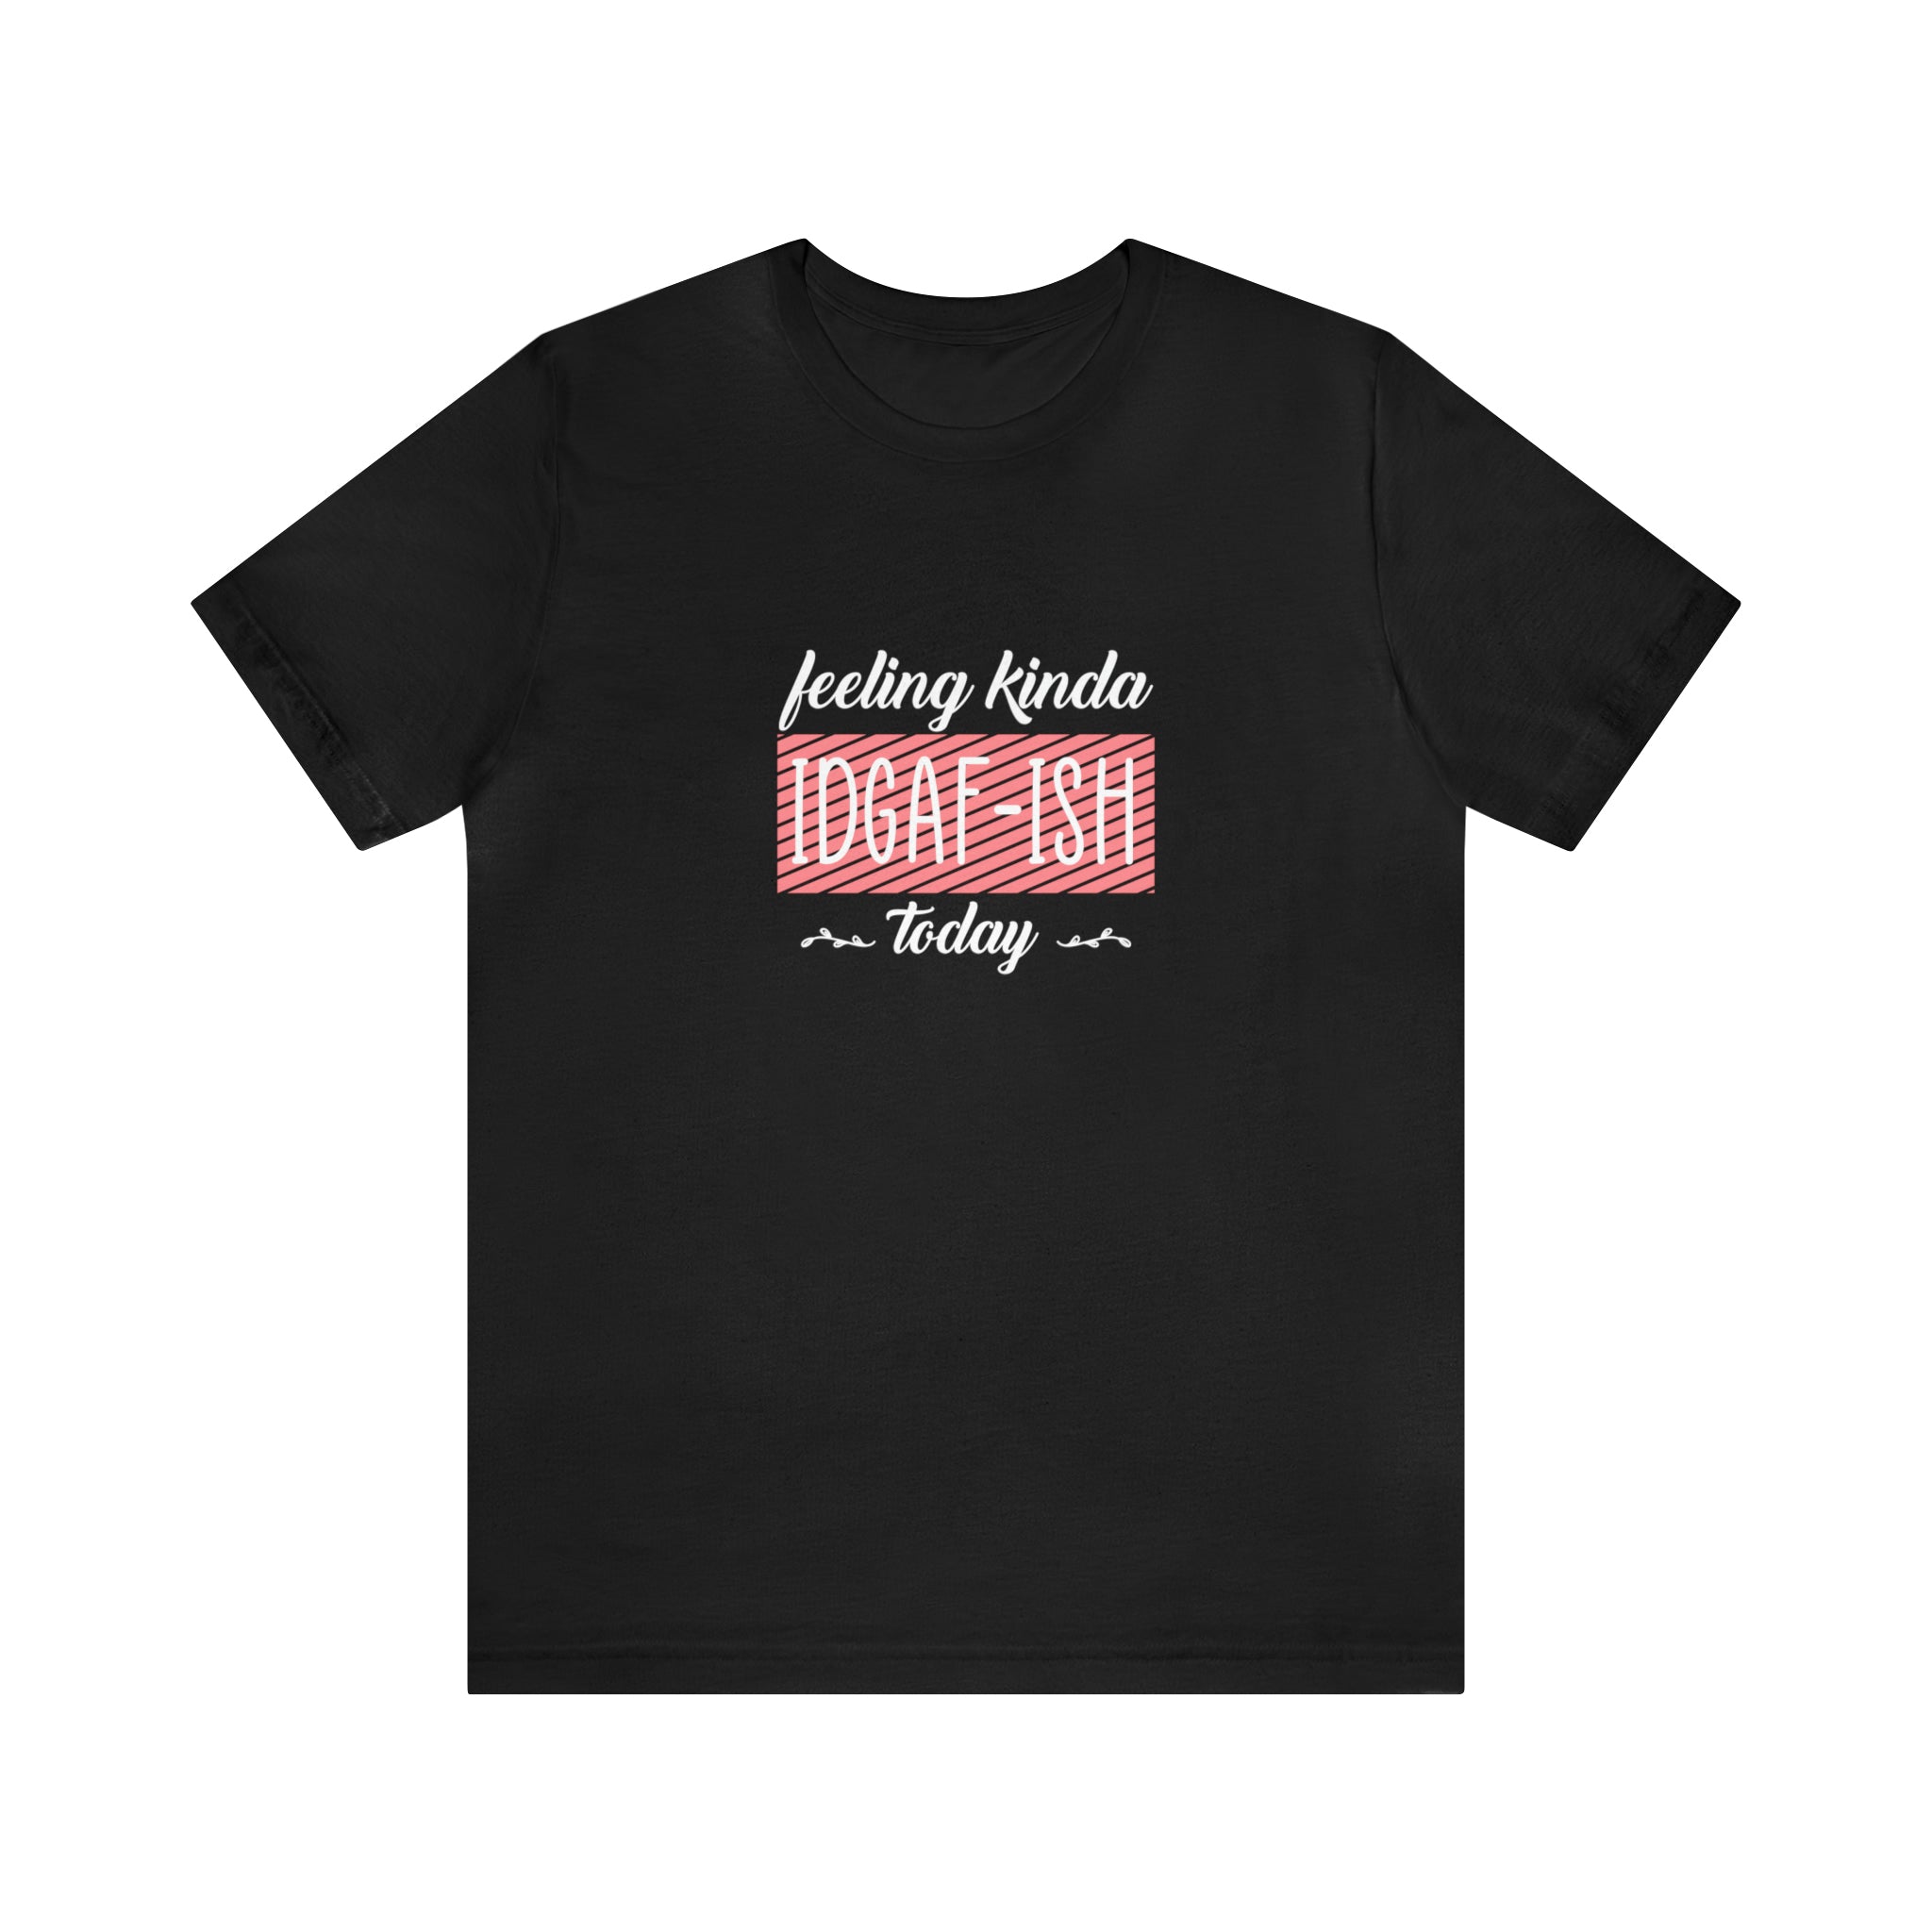 A Feeling kinda T-Shirt by Printify with a red and white design.